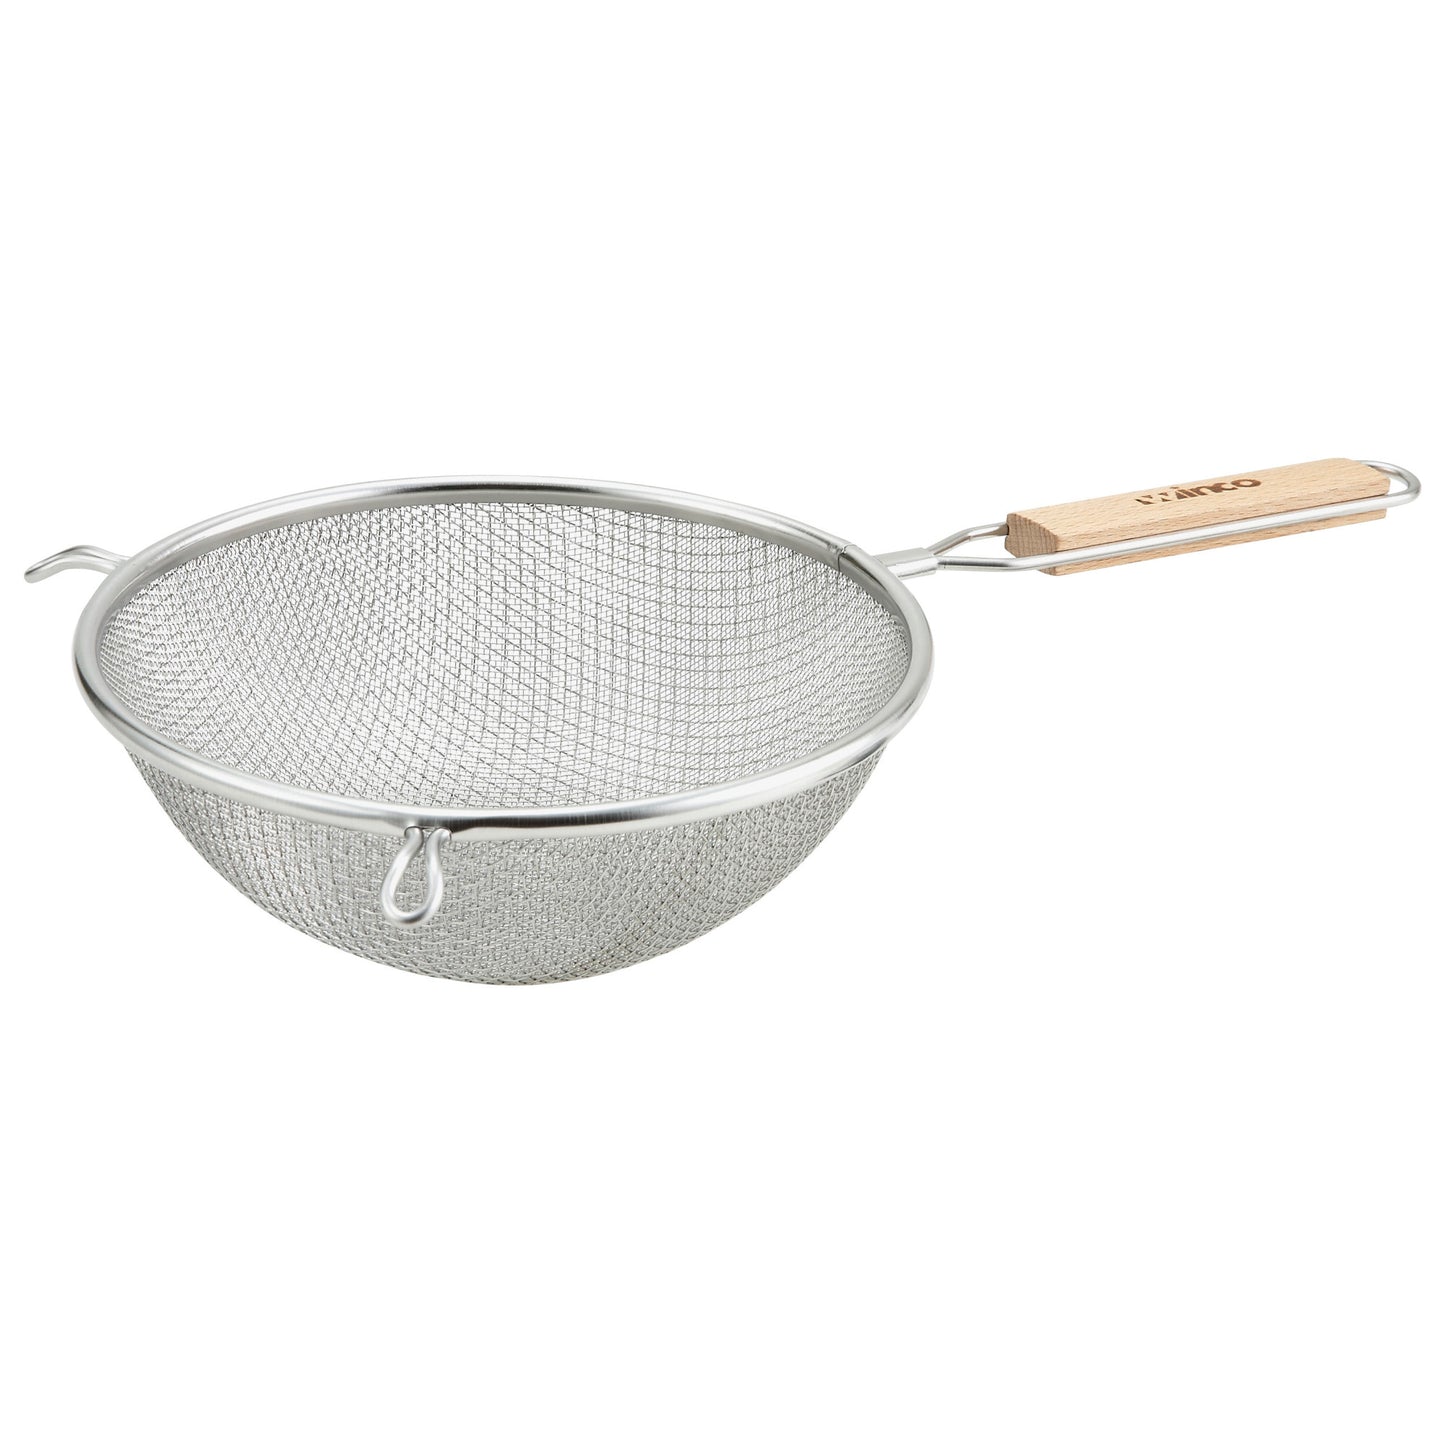 Fine Mesh Strainer, Stainless Steel - Double, 8"